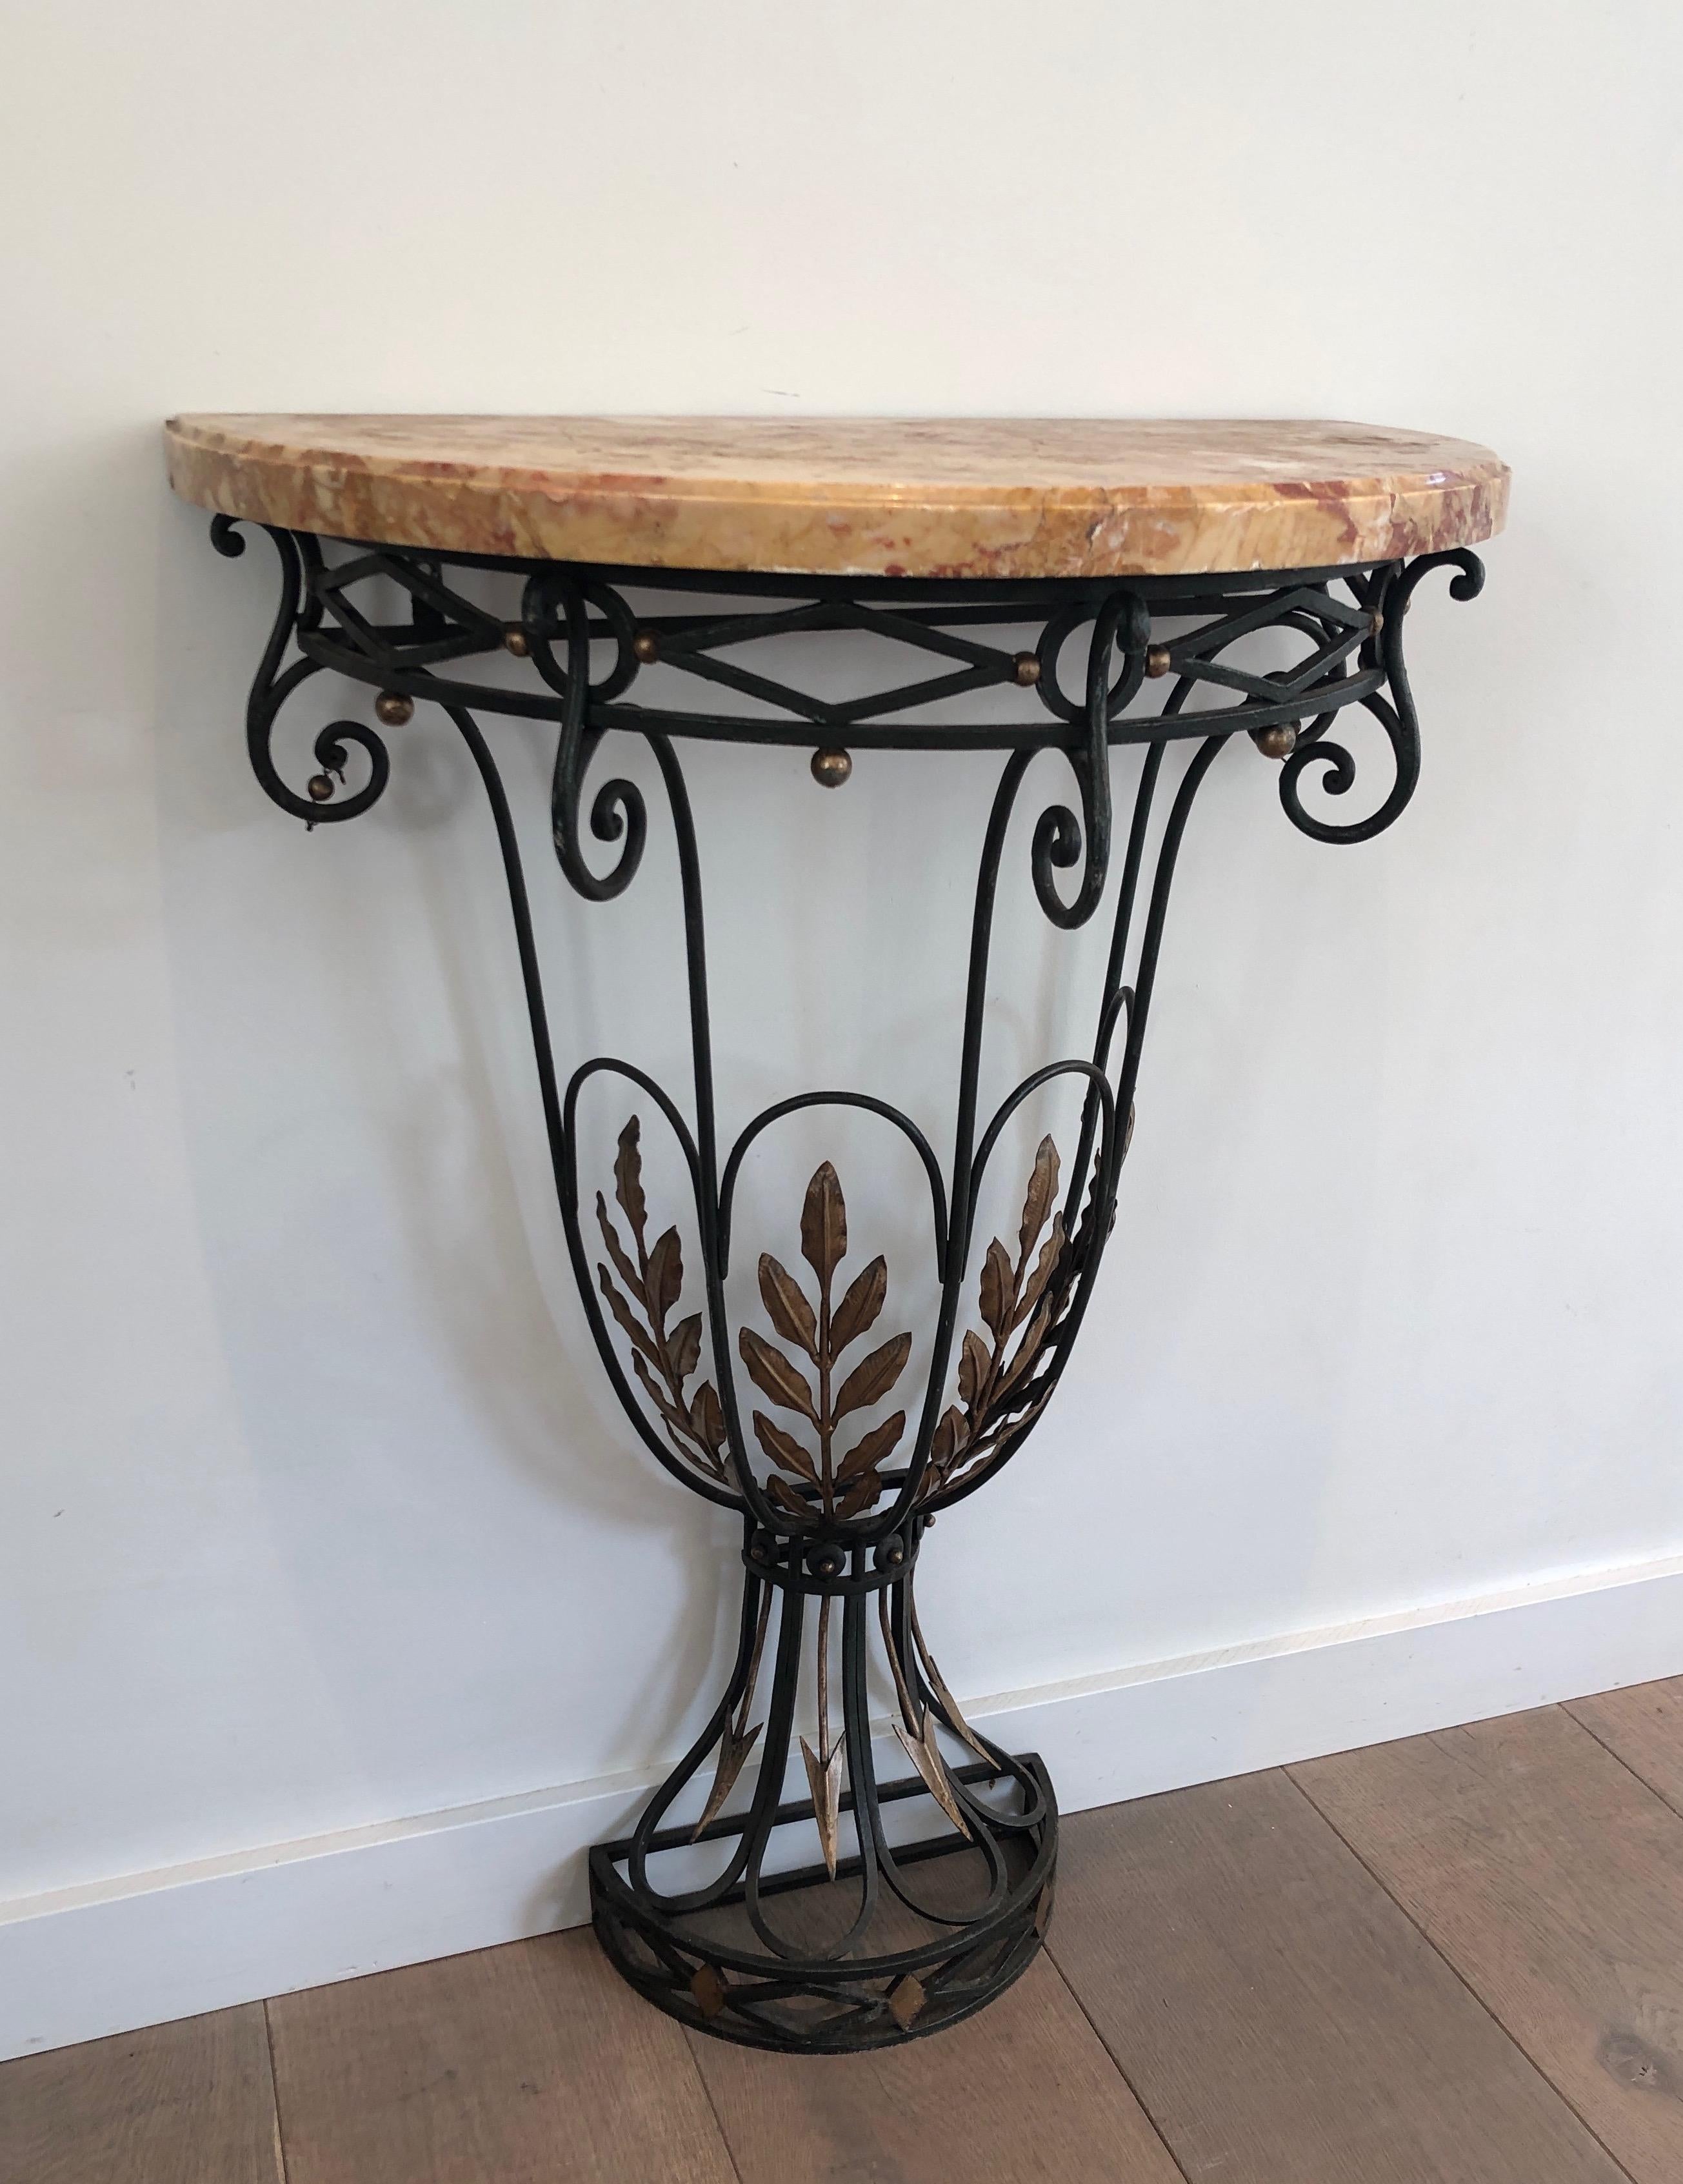 This rare small half-moon console is made of wrought iron with decorations of leaves and arrows and a marble on top. This is a French work. Circa 1940